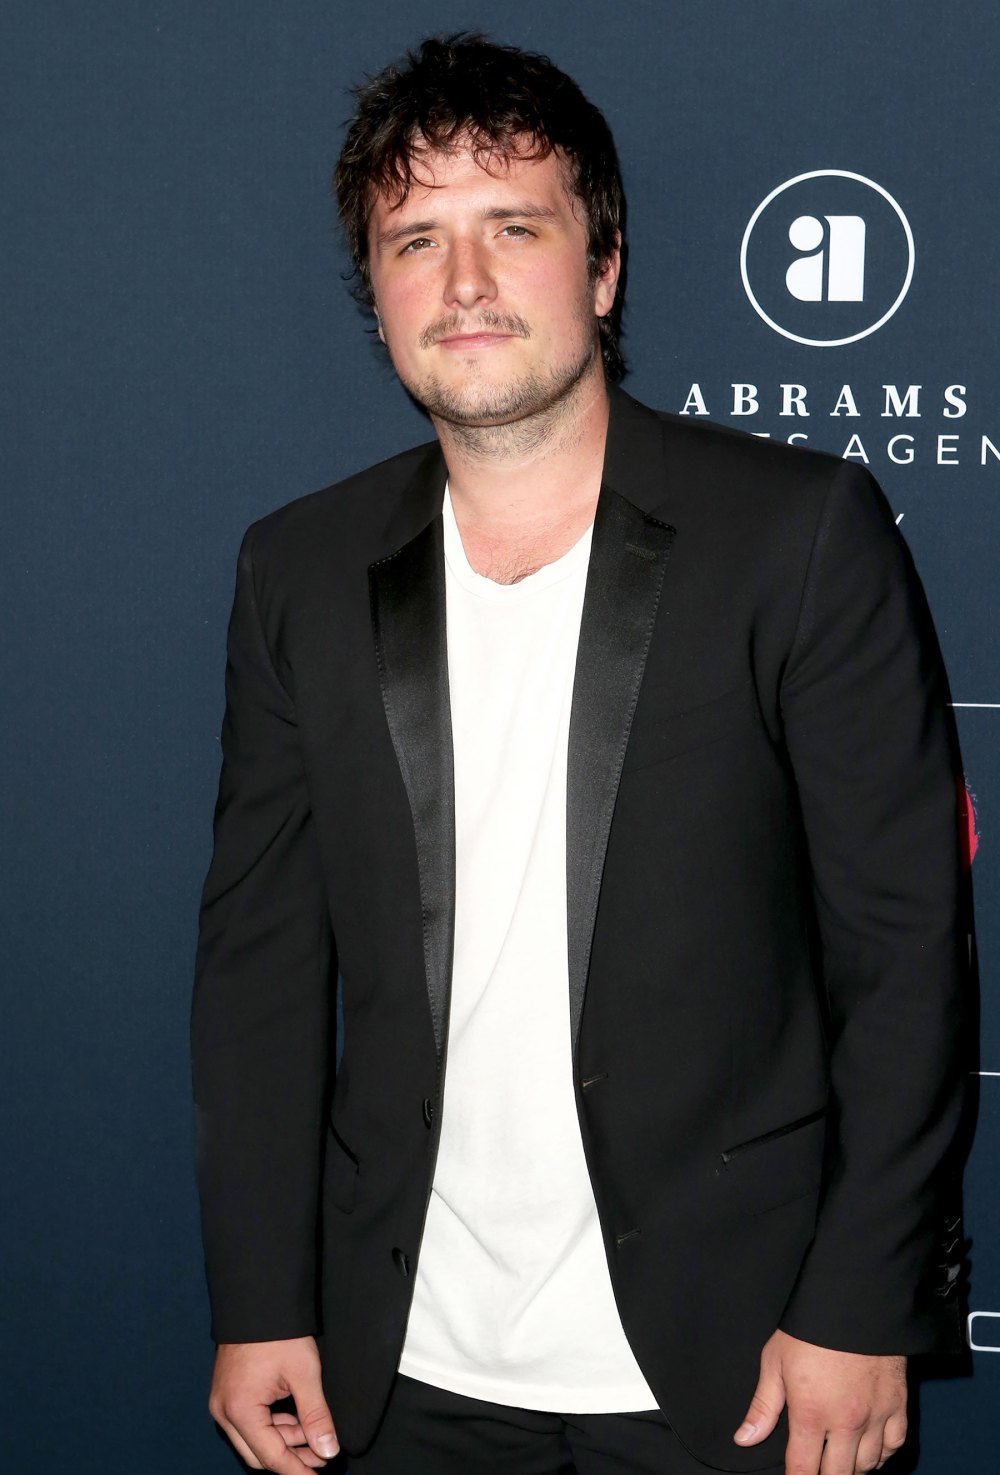 Is There a 'Hunger Games' Group Chat? Josh Hutcherson Says...